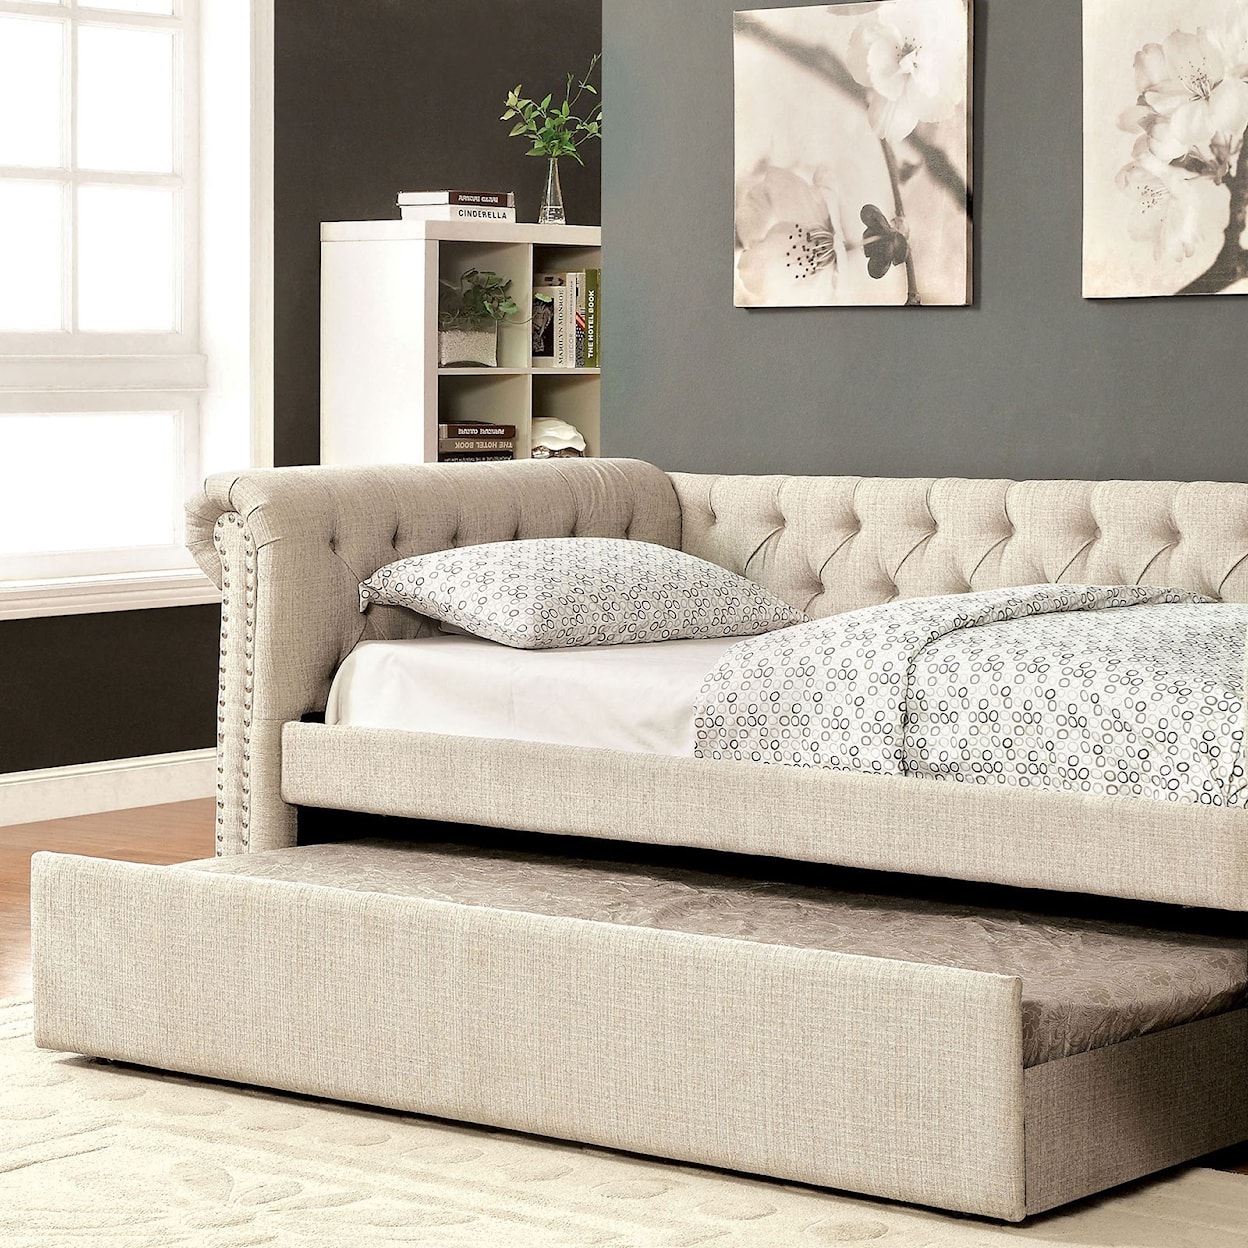 Furniture of America Leanna Daybed w/ Trundle